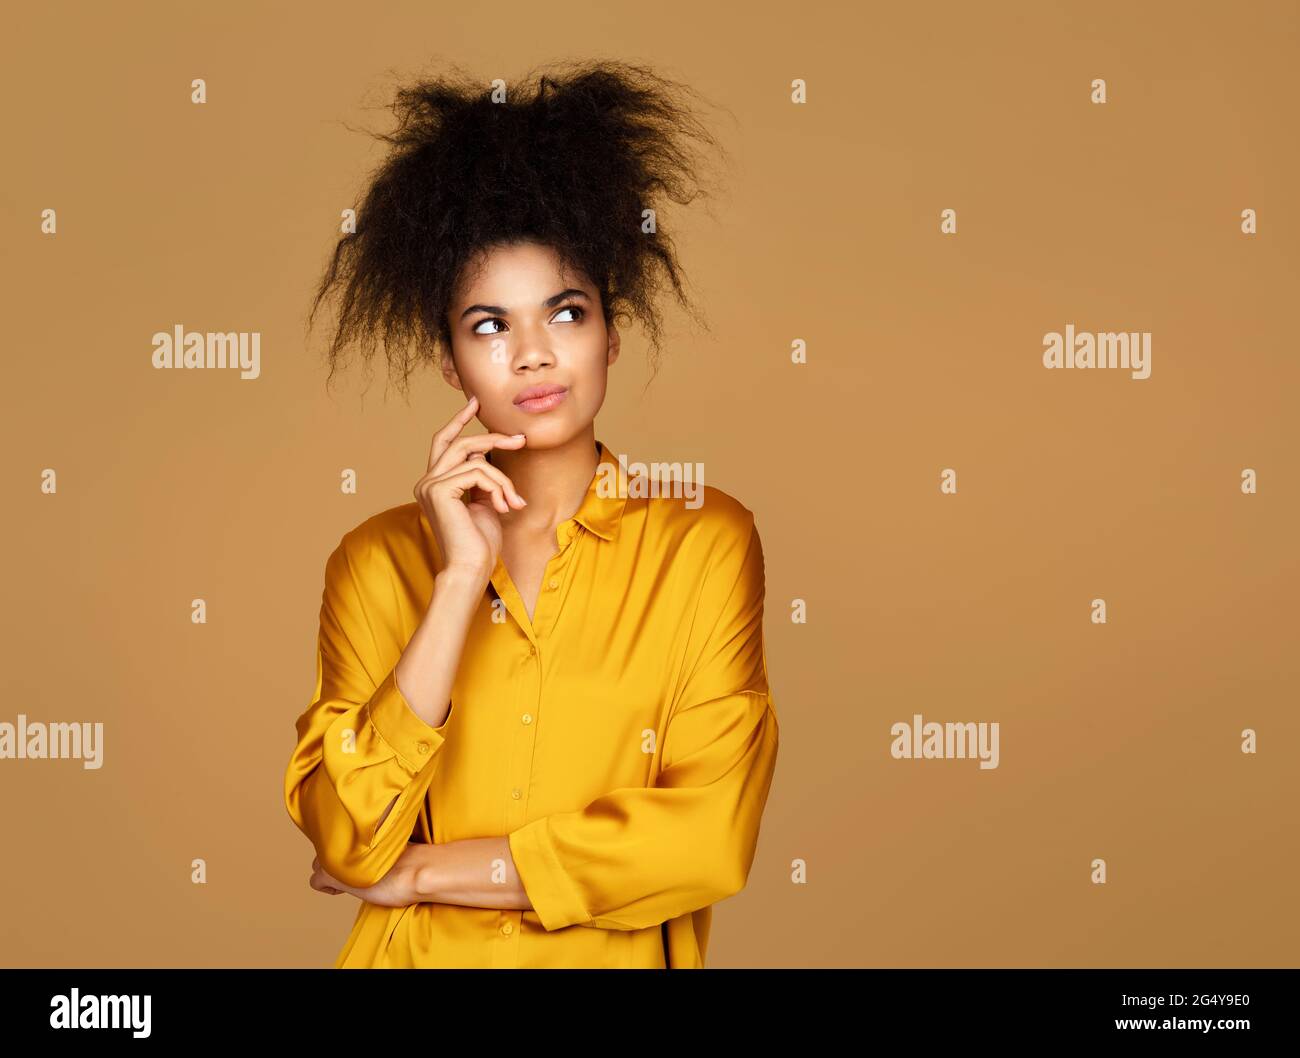 Thoughtful girl thinks about something, makes decision. Photo of african american girl on beige background Stock Photo